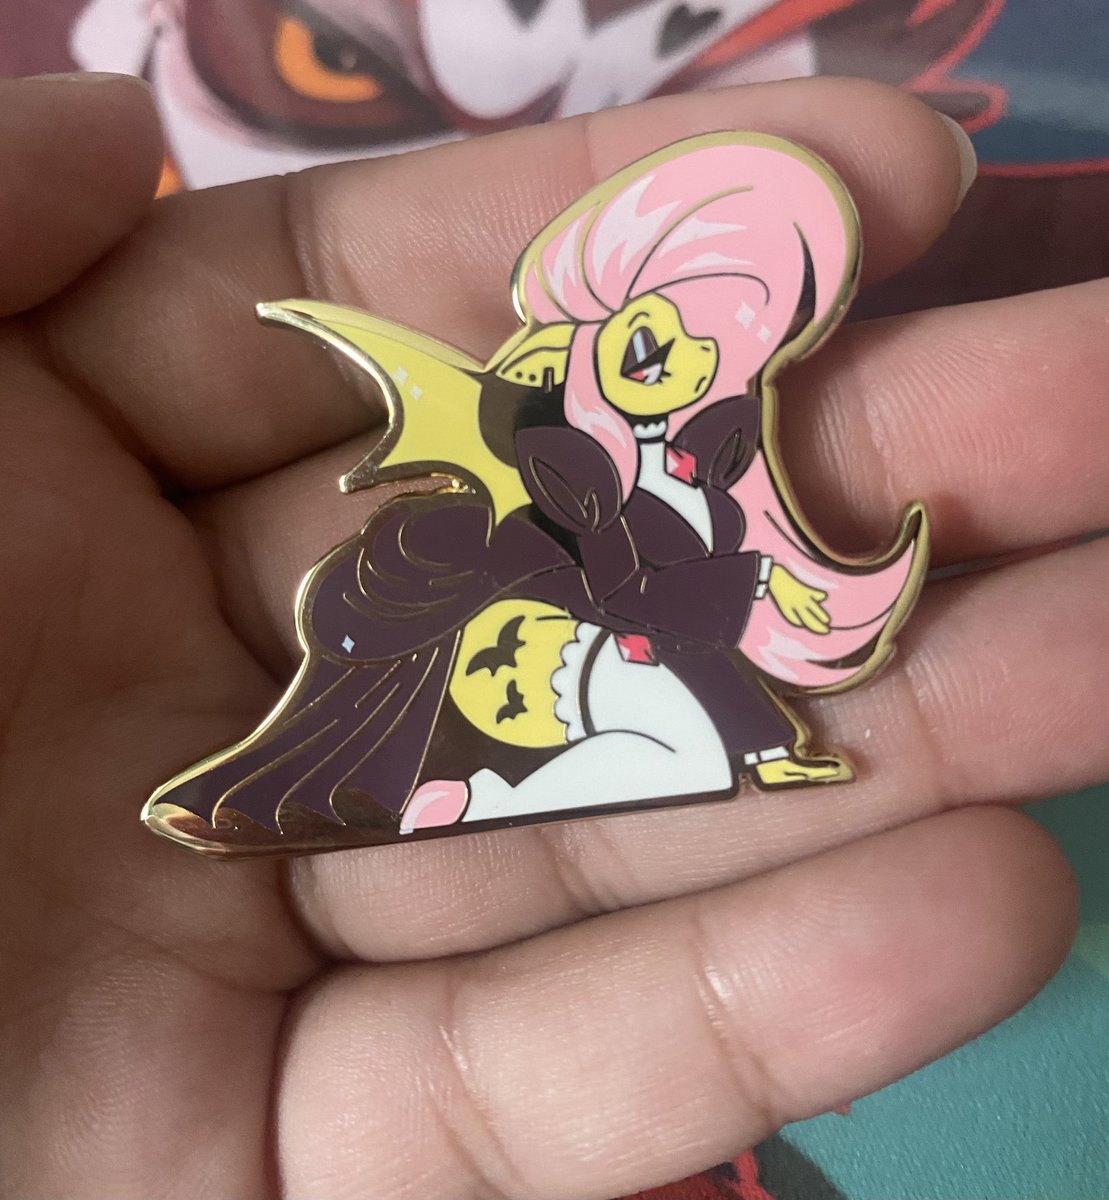 Vampire Fluttershy Pin from @SpookieGhoulie ✨ I can’t get enough of their pins!